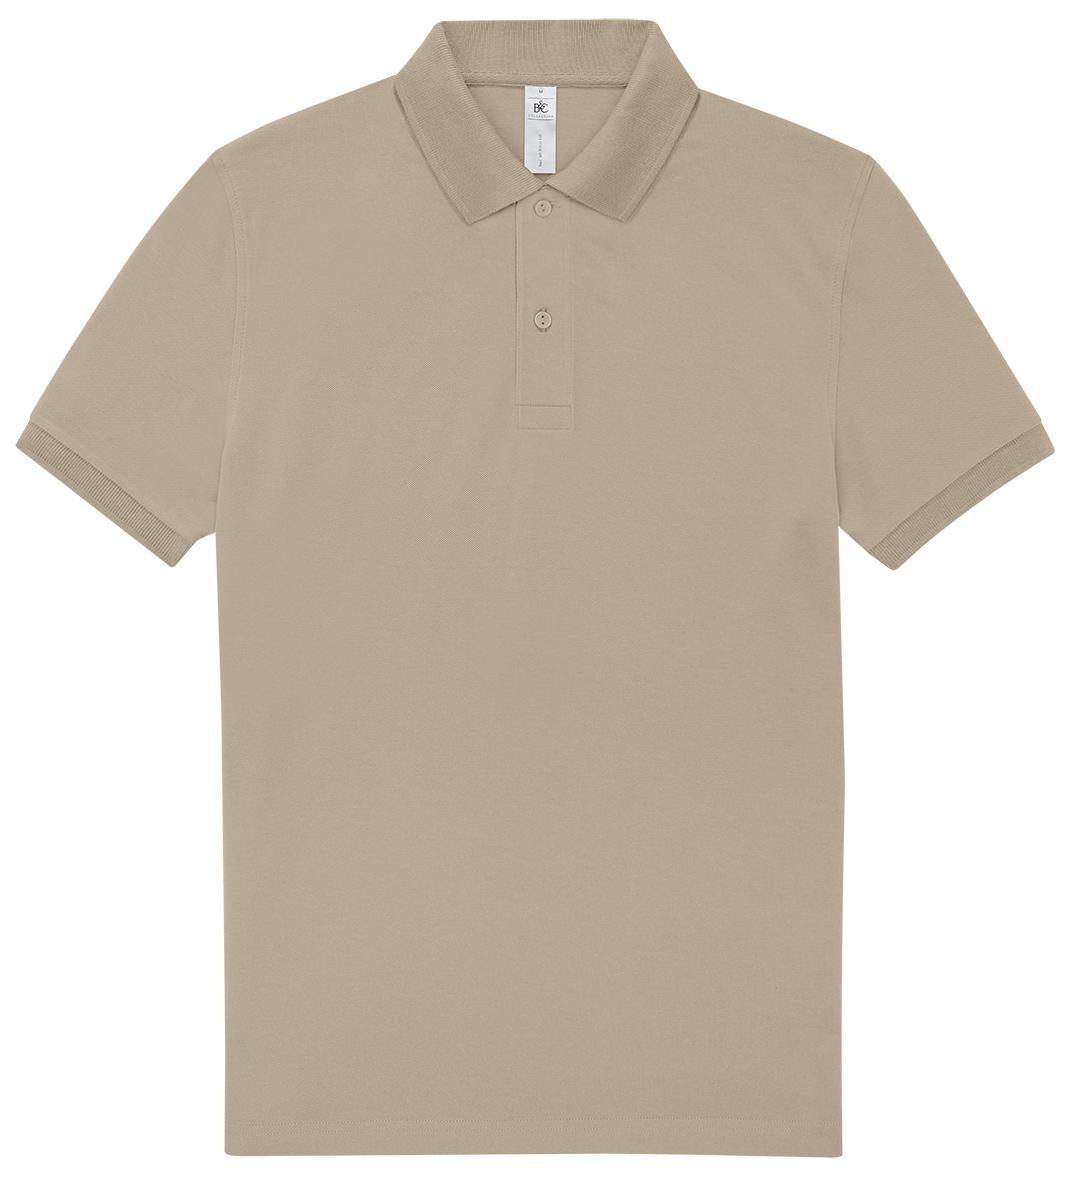 B&C Collection My Polo 210 - Mastic